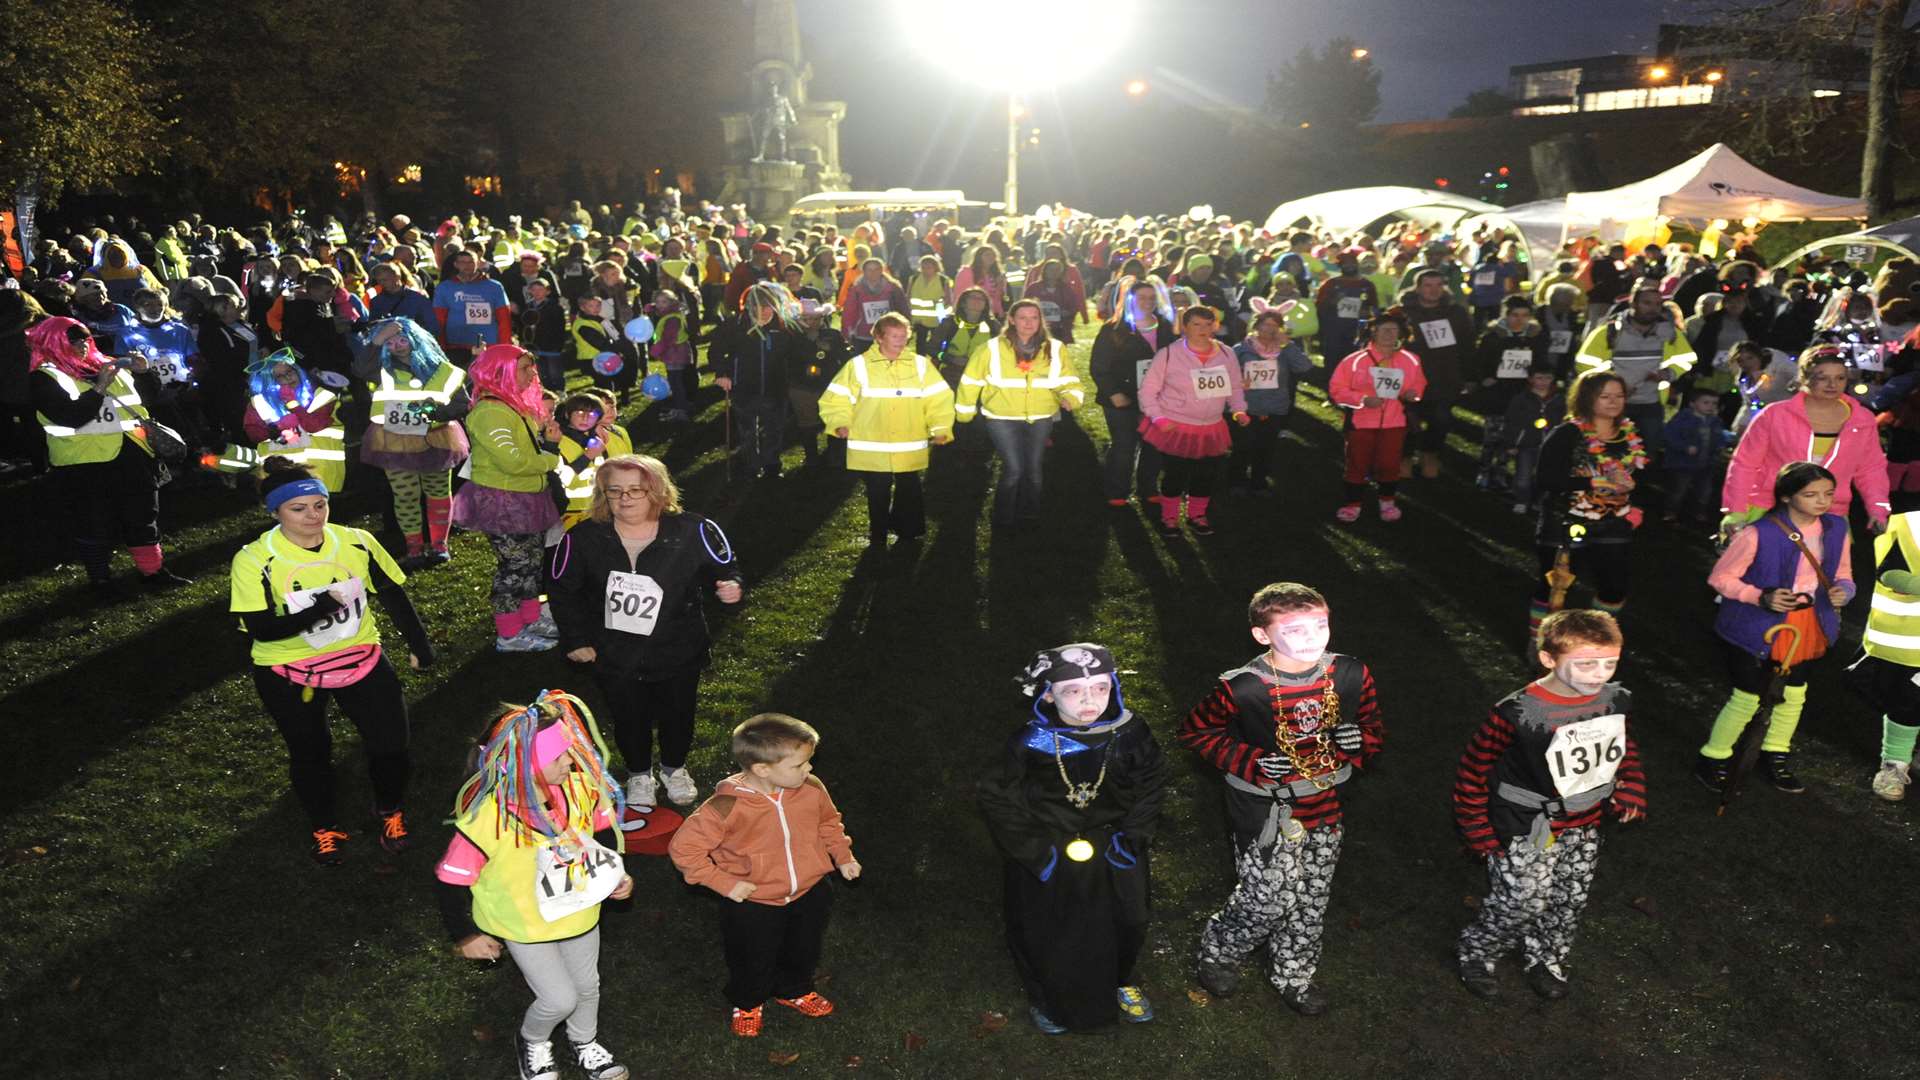 Colourful participants gather in Canterbury's Dane John Gardens for Light up the City.